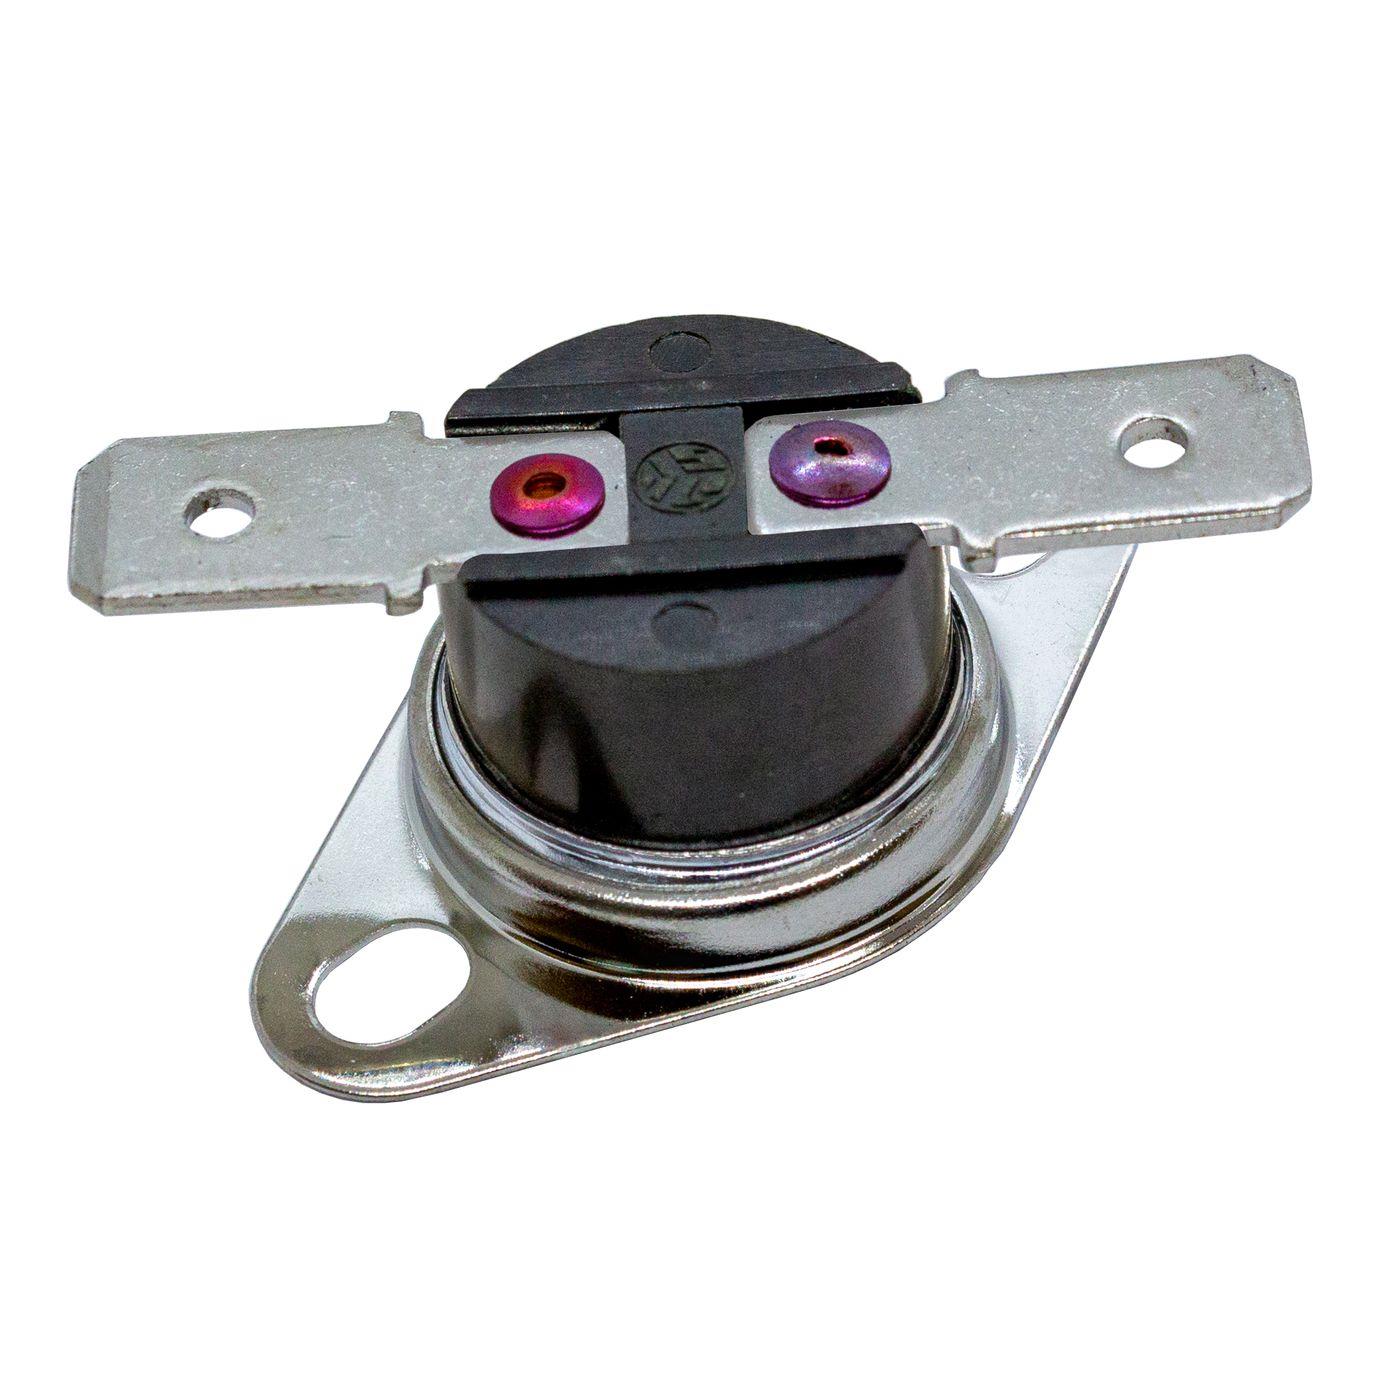 Thermal switch 40°C NO contact 250V 10A Temperature switch thermostat KSD301 Bimetal Thermal protection